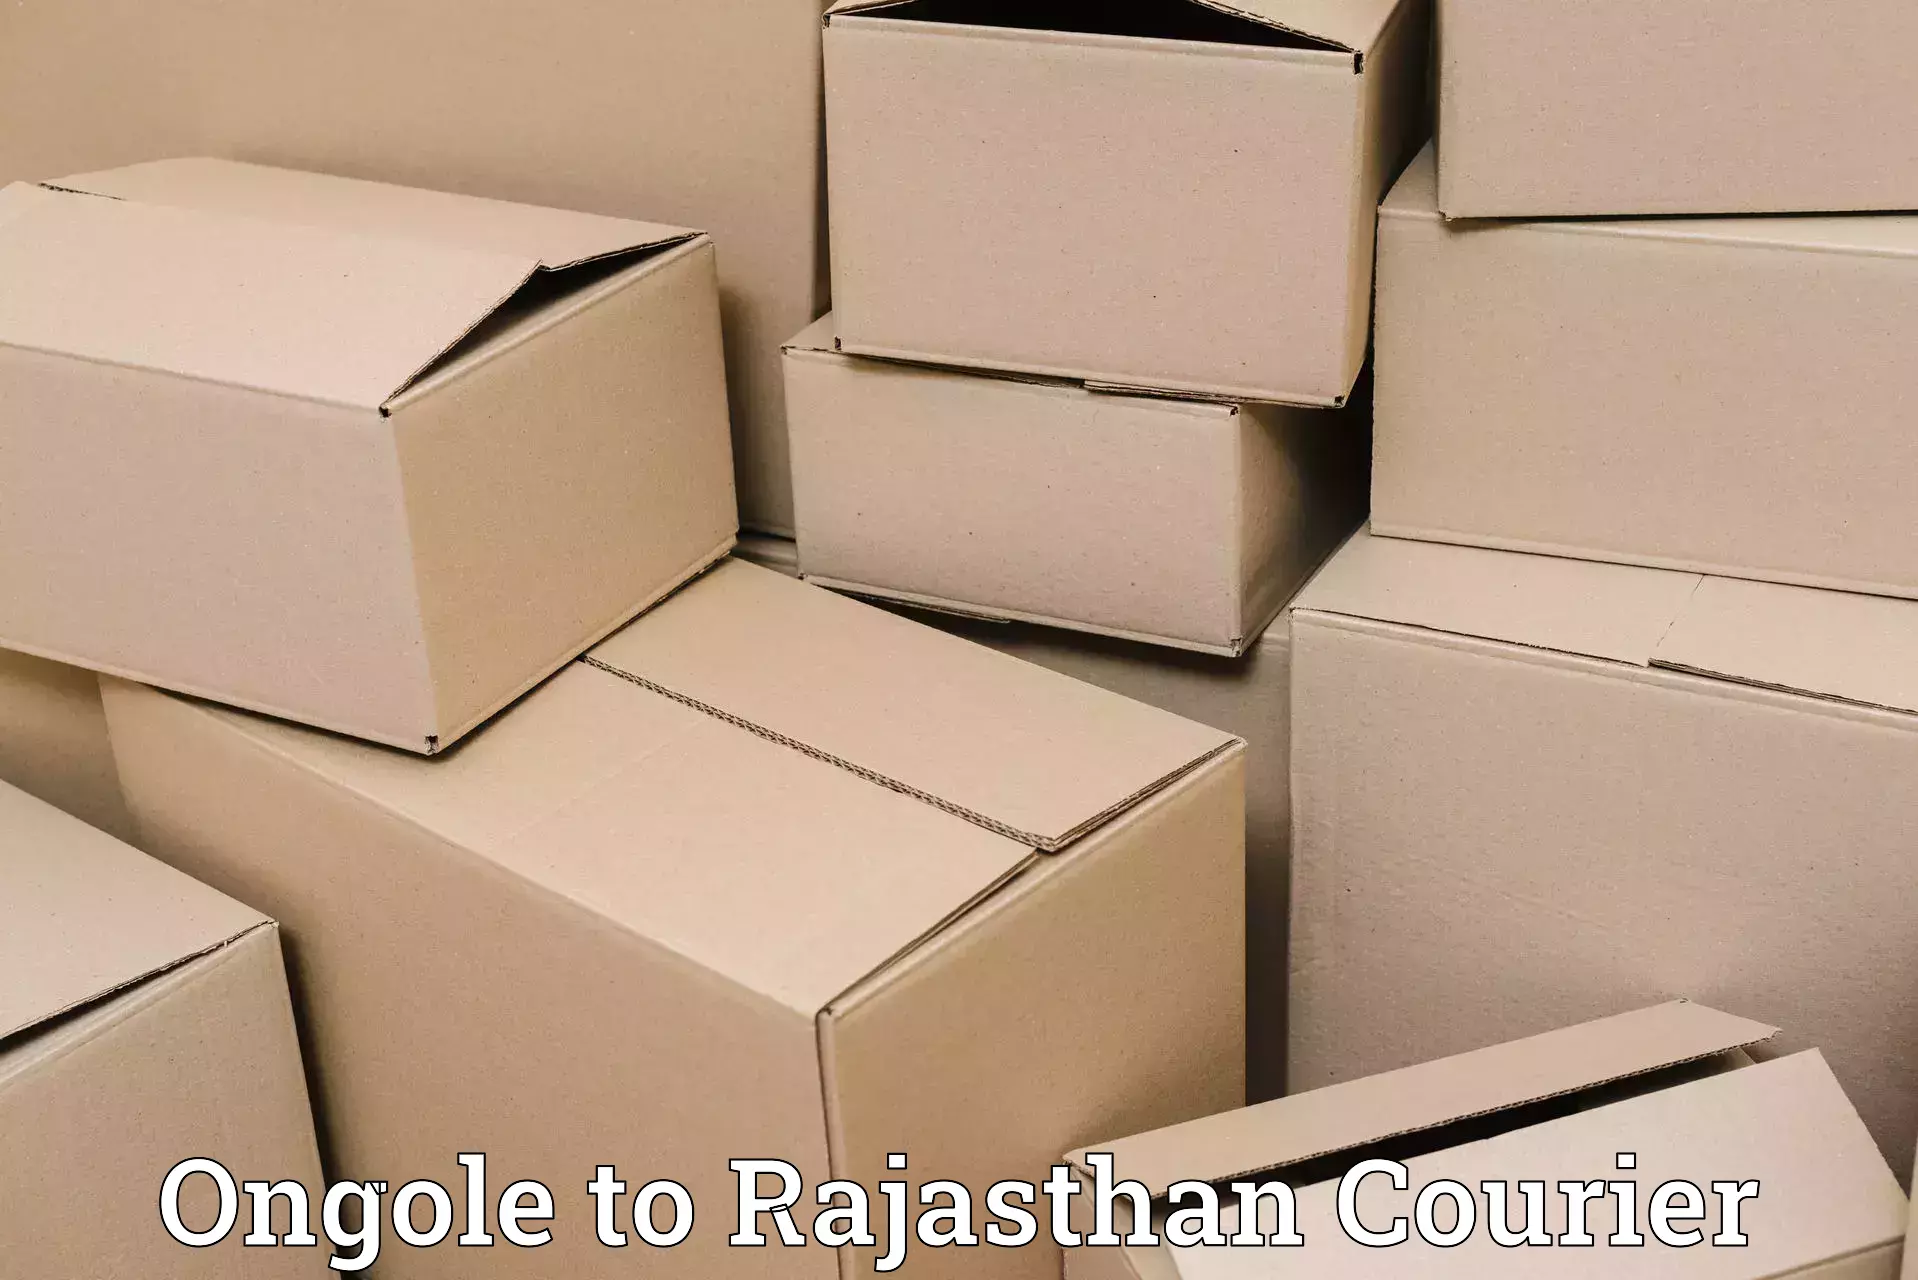 Courier membership Ongole to Rajasthan